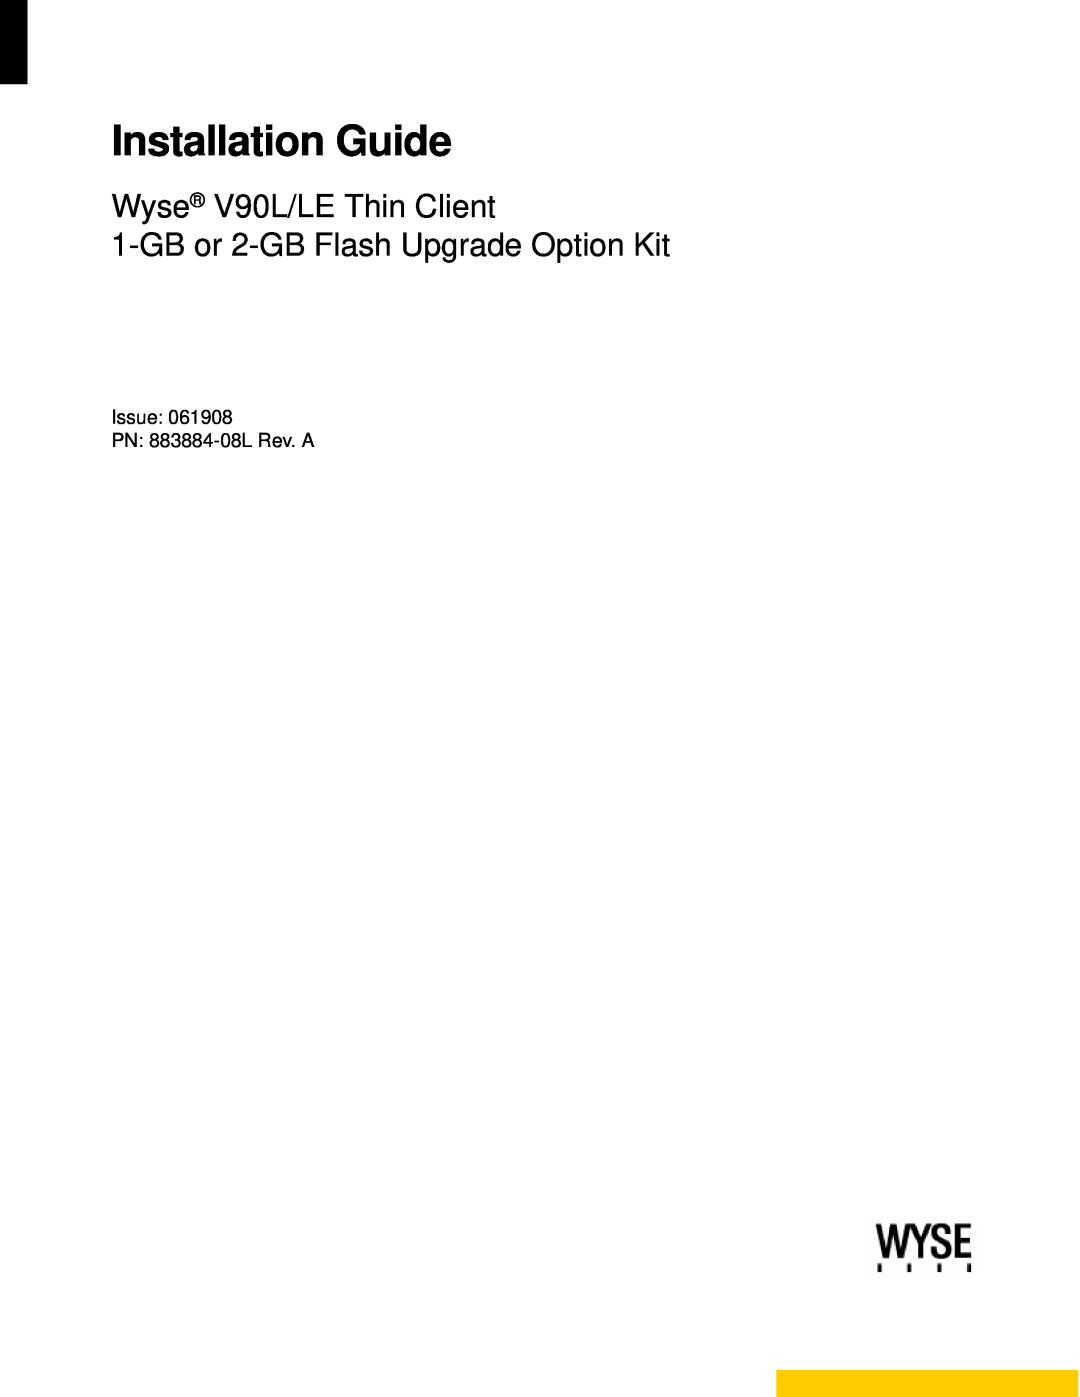 Wyse Technology manual Installation Guide, Wyse V90L/LE Thin Client 1-GB or 2-GB Flash Upgrade Option Kit 